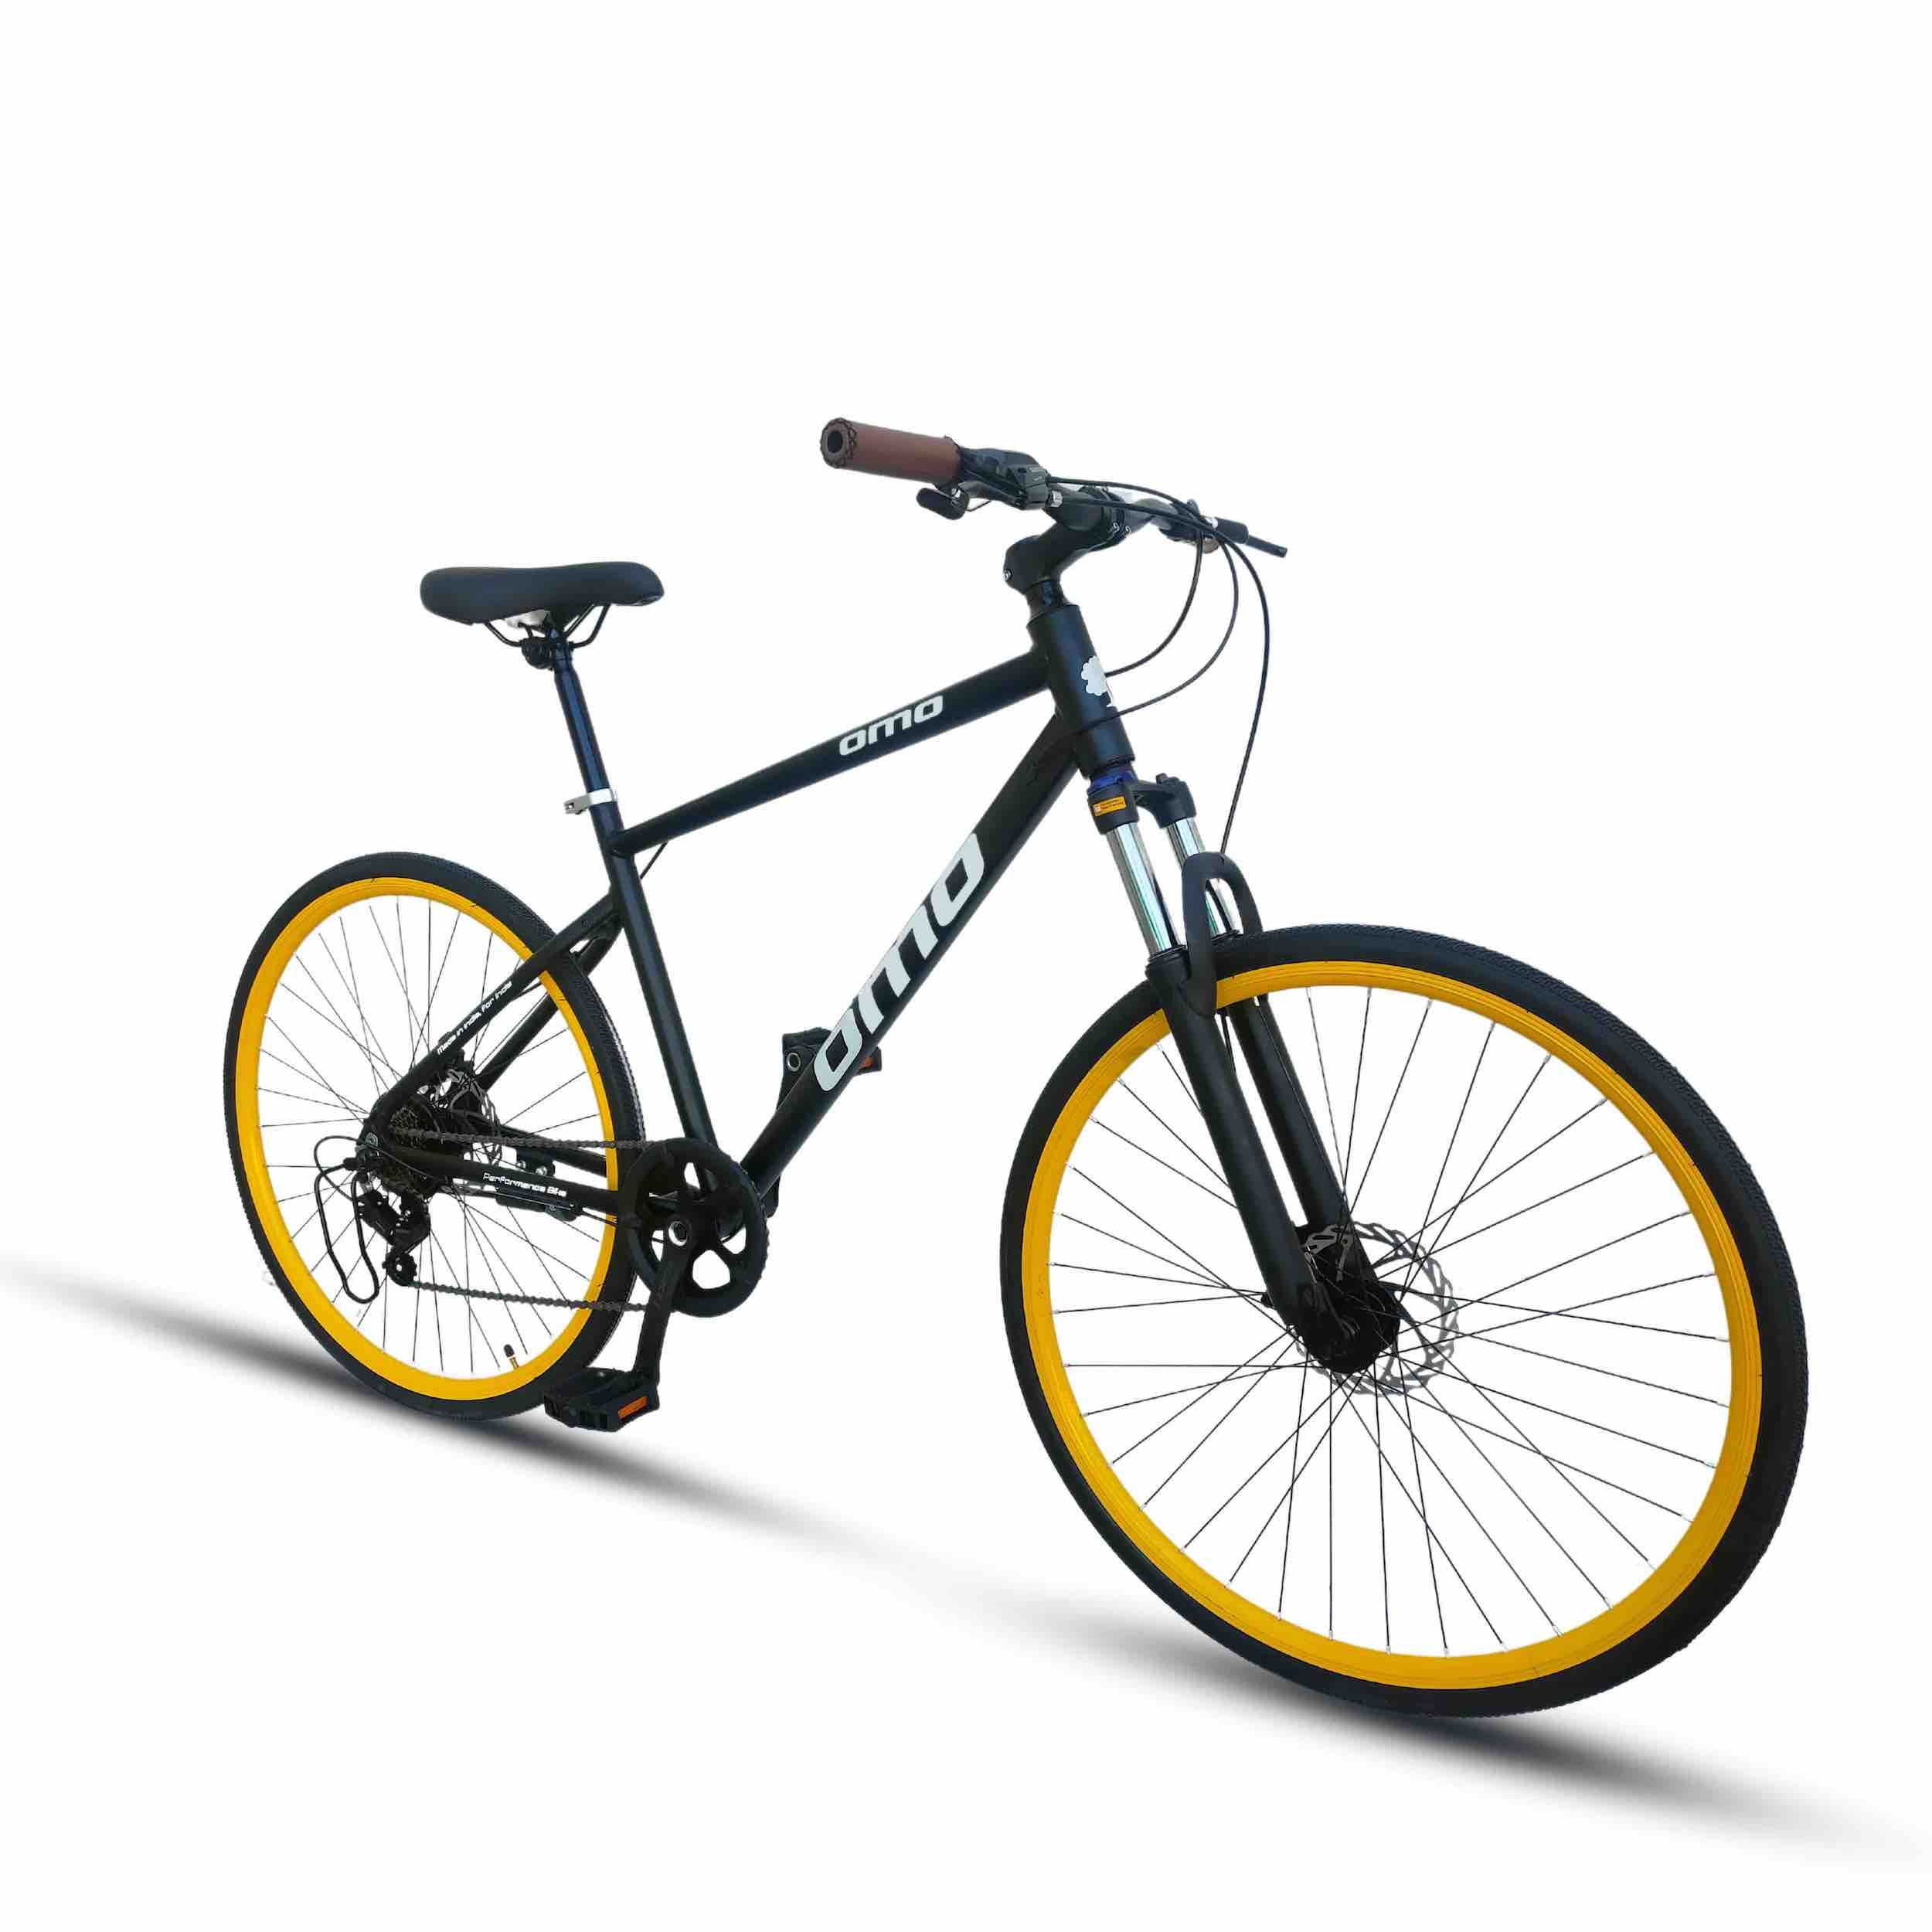 Buy Premium Quality Geared and Non Geared Hybrid Bikes for Men and Adult